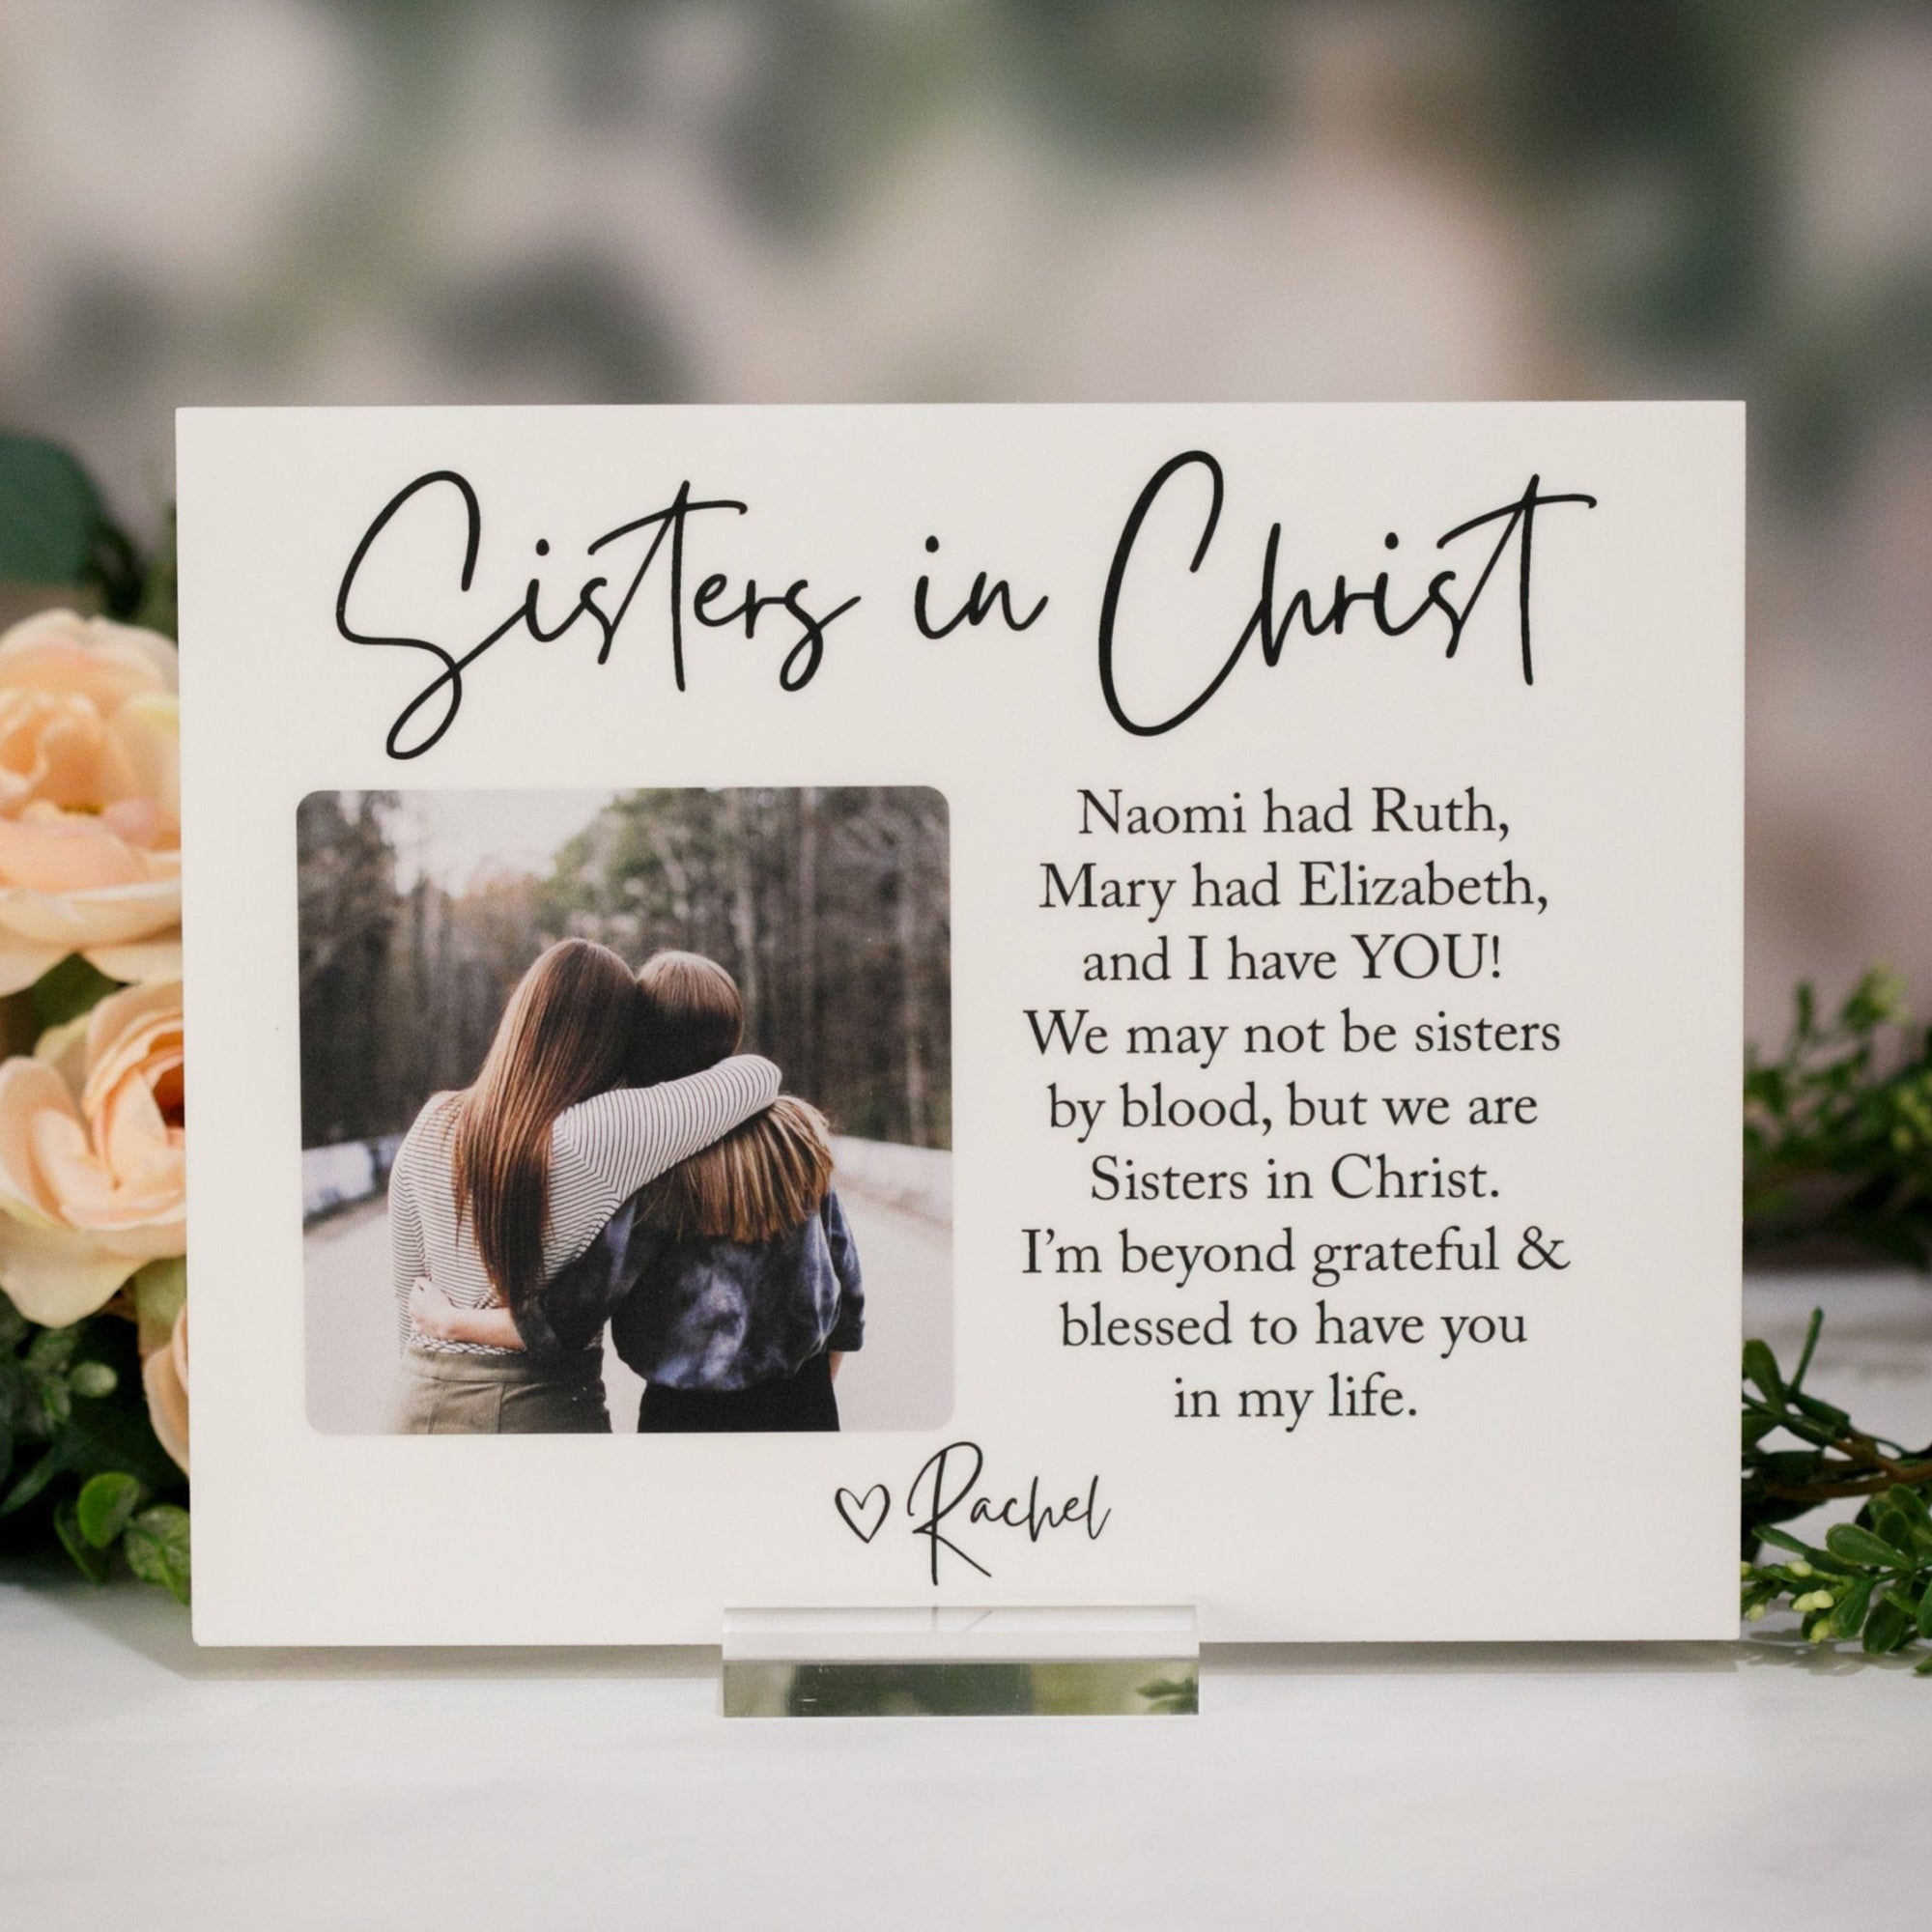 To My Sister In Christ Personalized Name Scripture Verse Encouragement Tile Plaque Christian Gift For Religious Church Bible Study Friend